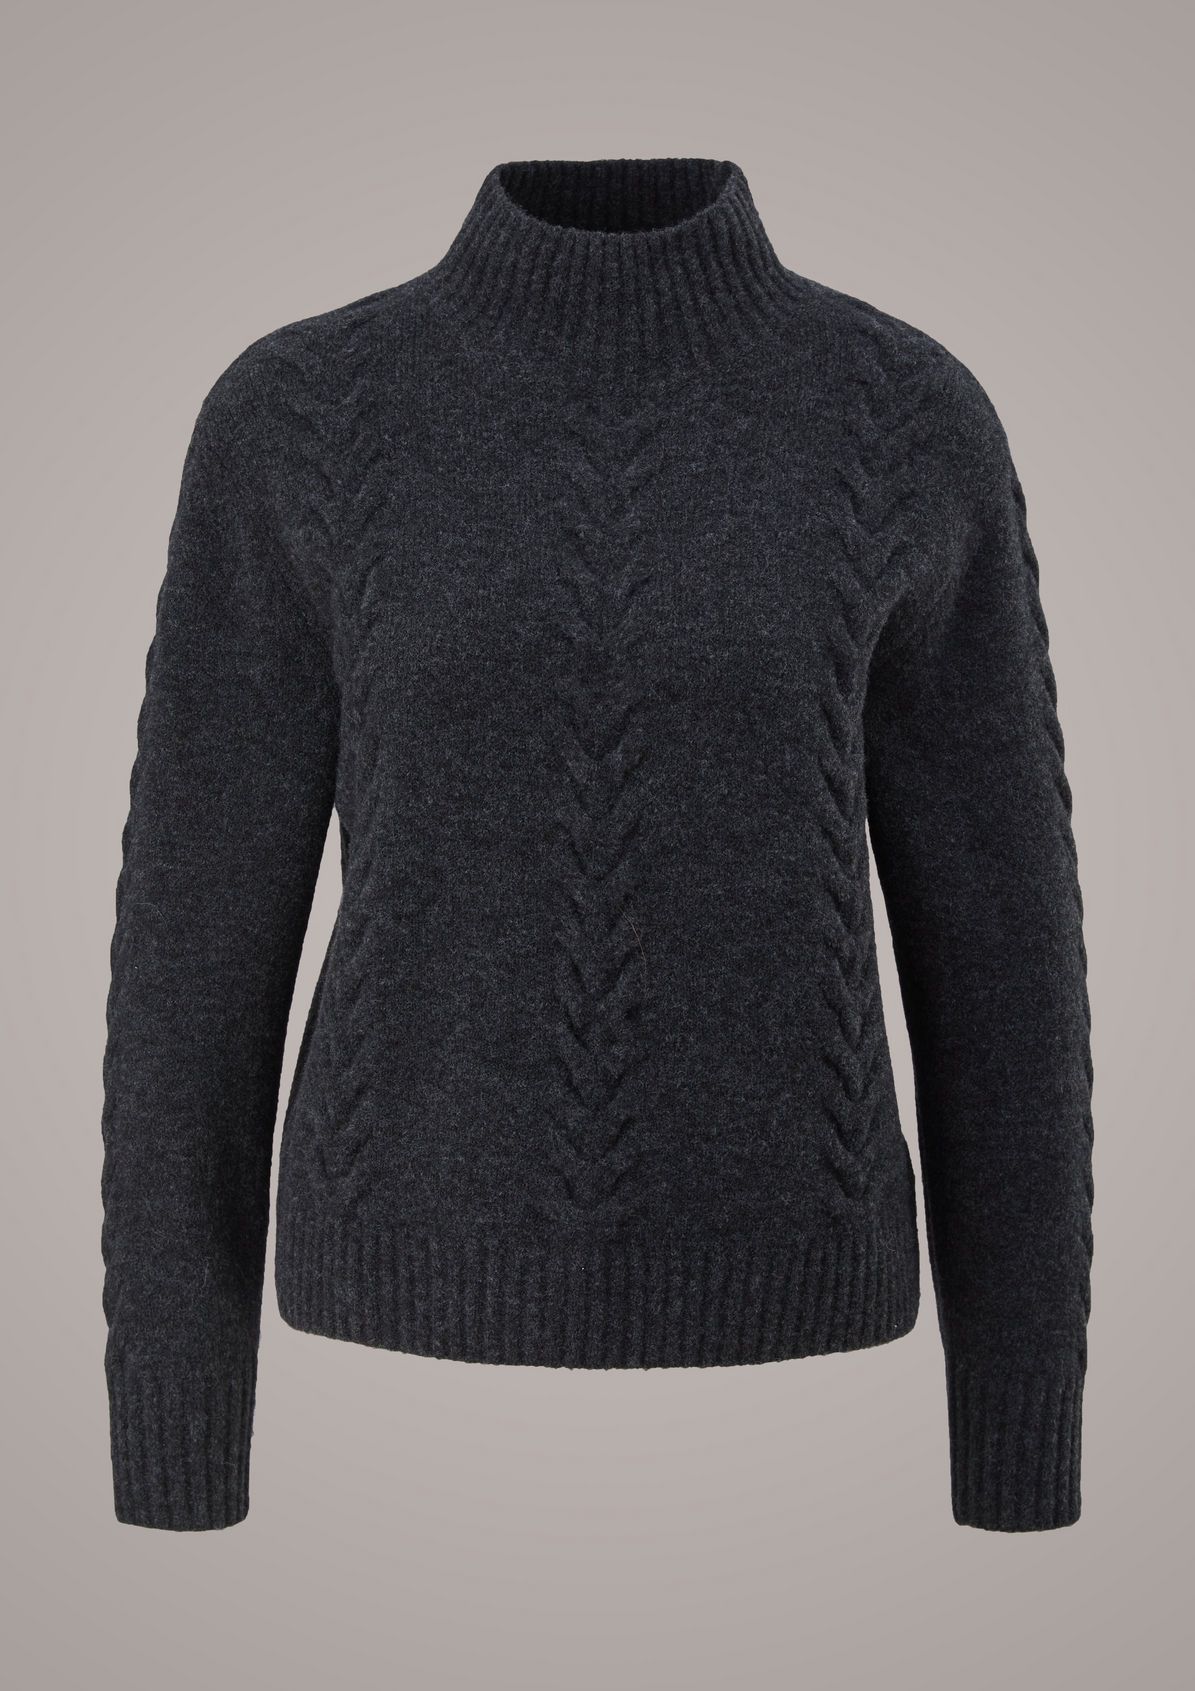 Wool blend jumper with a cable knit pattern from comma